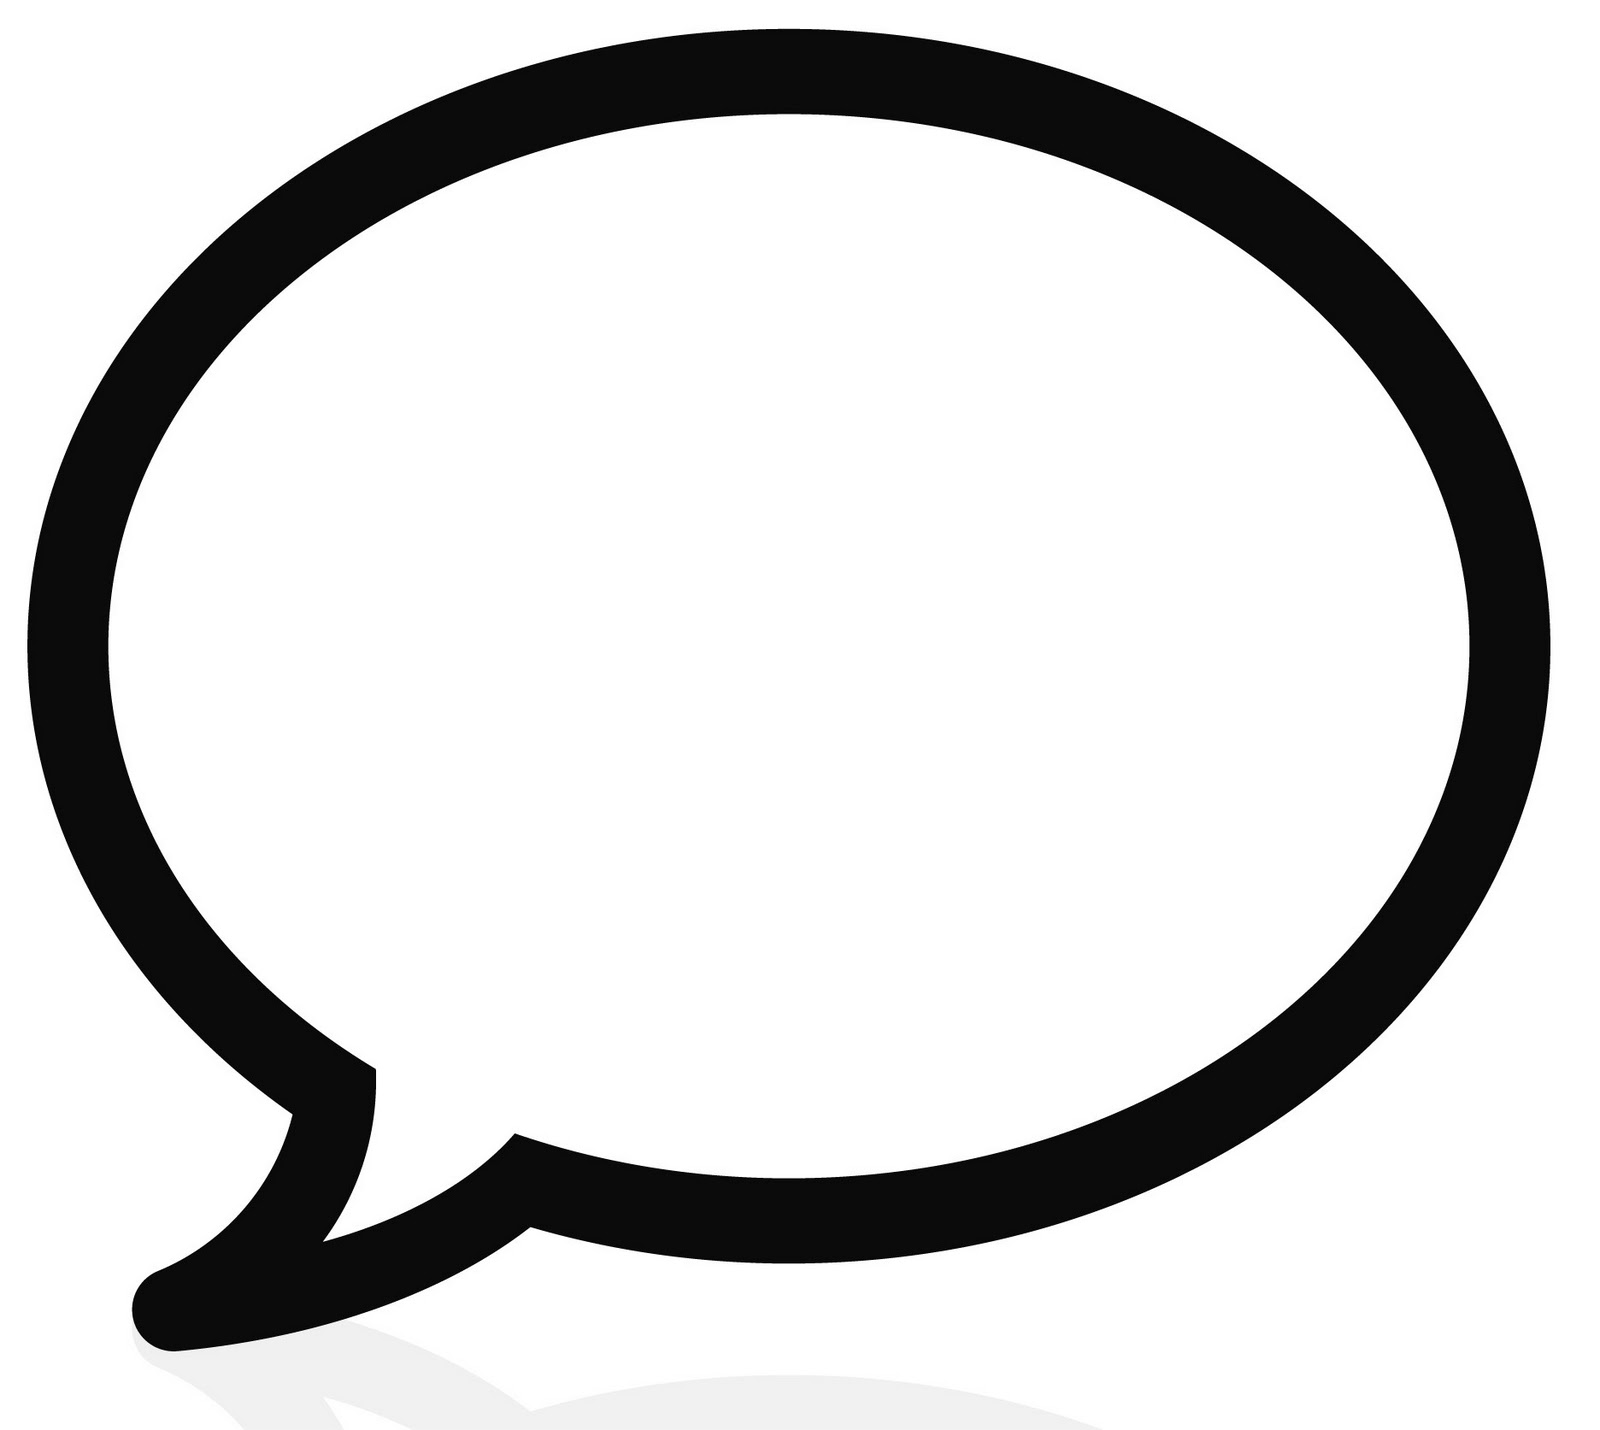 Speech Bubble Template With Lines - Clipart library